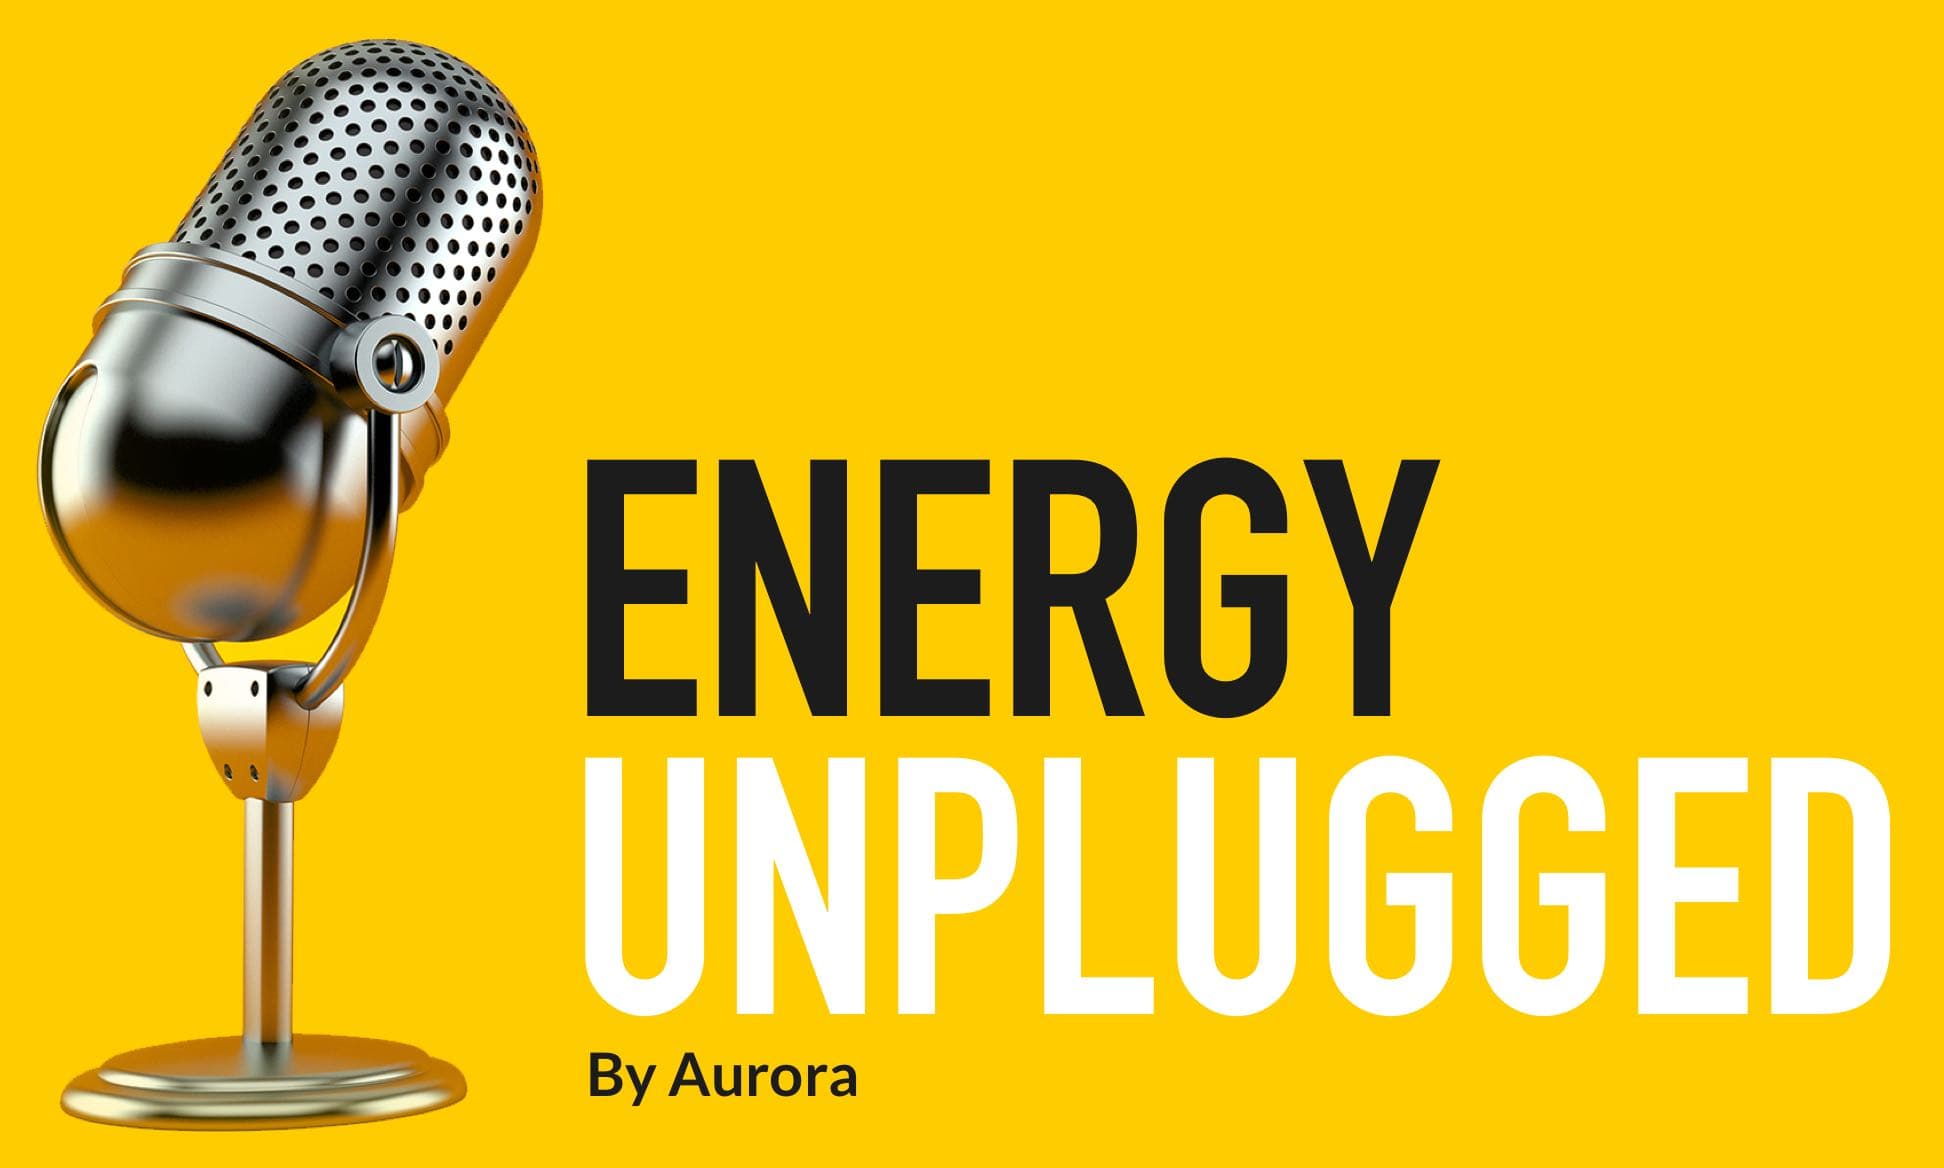 Ralph Johnson discusses battery optimisation with Aurora Energy Unplugged